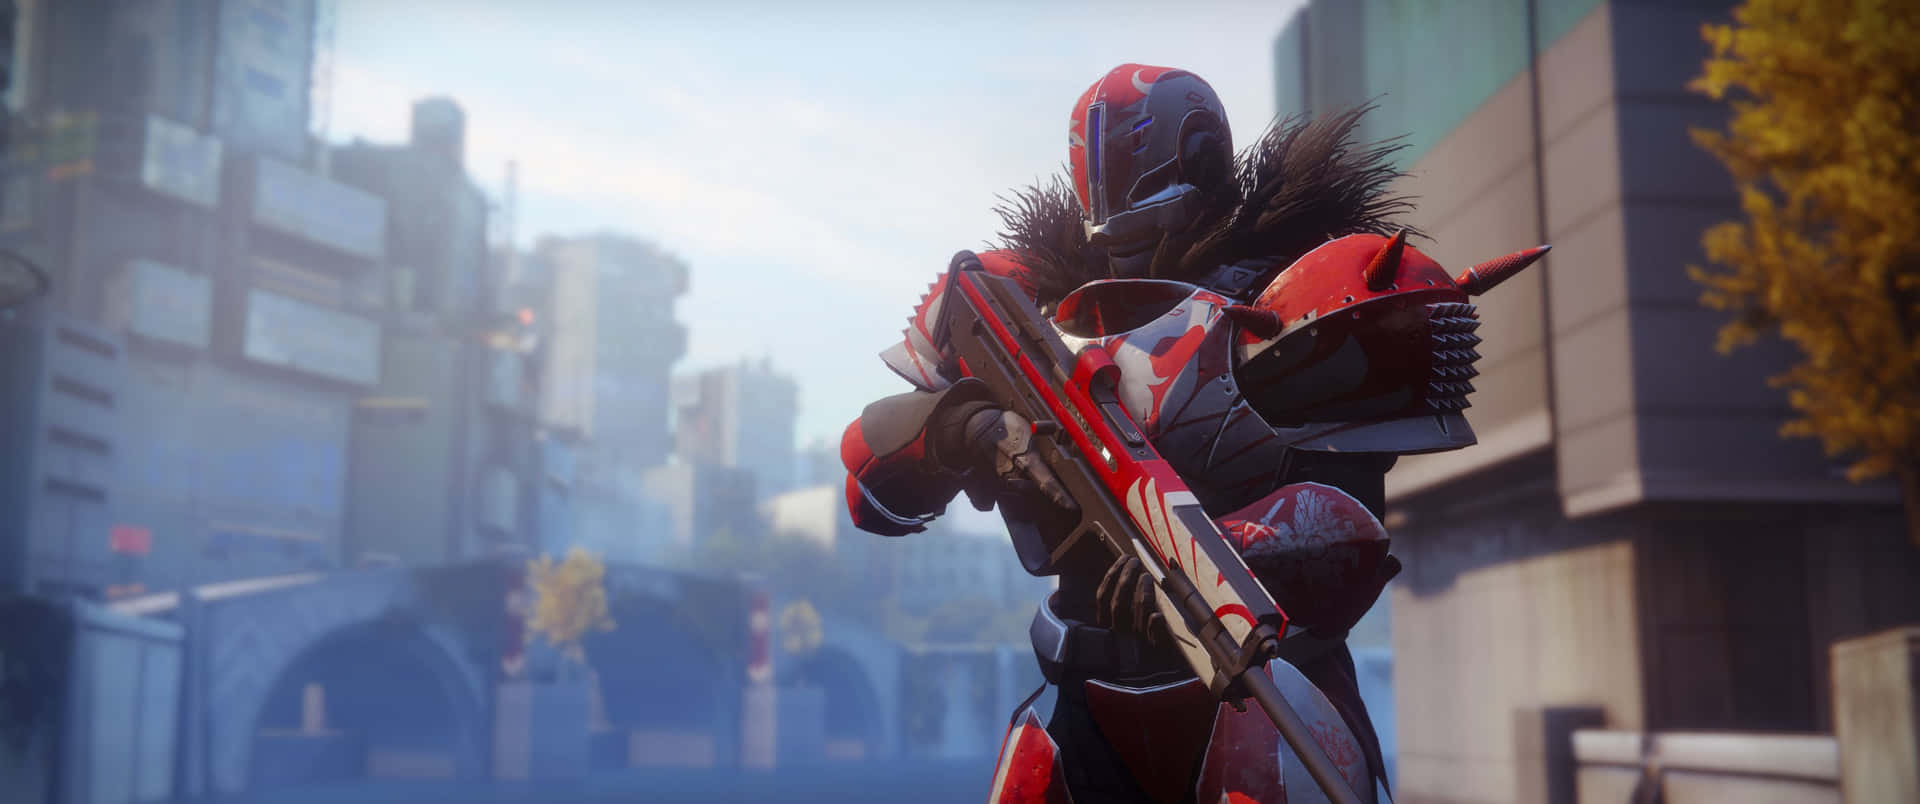 Earning Victory in the FPS Shooter Destiny 2